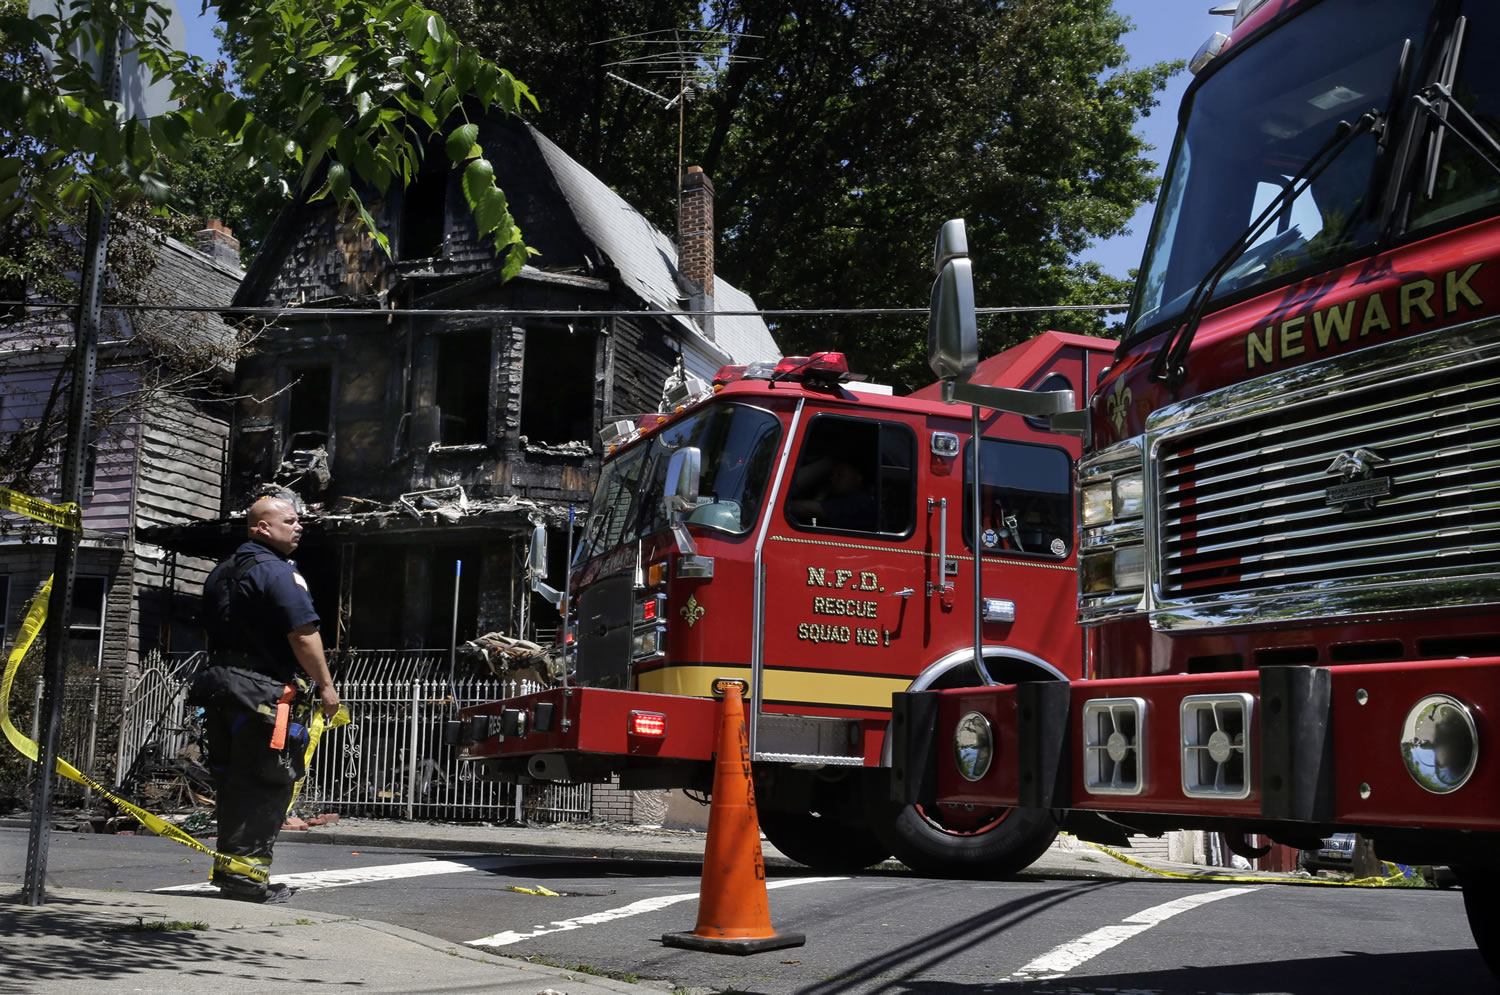 Firefighters work near the rubble of a burned-out home Sunday as they look for clues to a fire that authorities say killed six people in Newark, N.J.